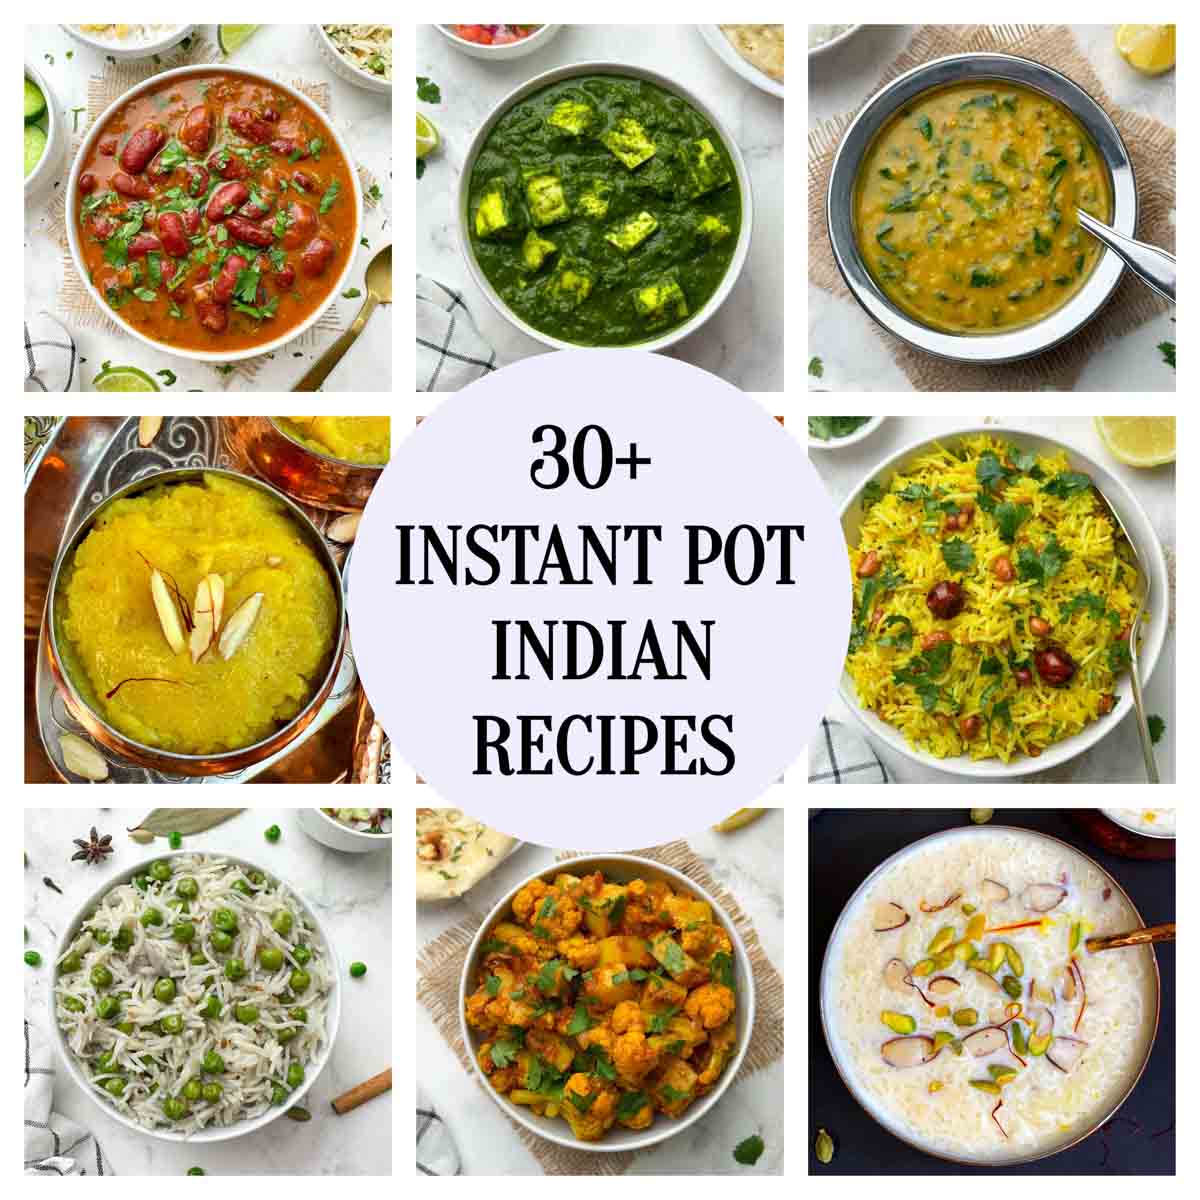 Instant Pot 101 - Piping Pot Curry